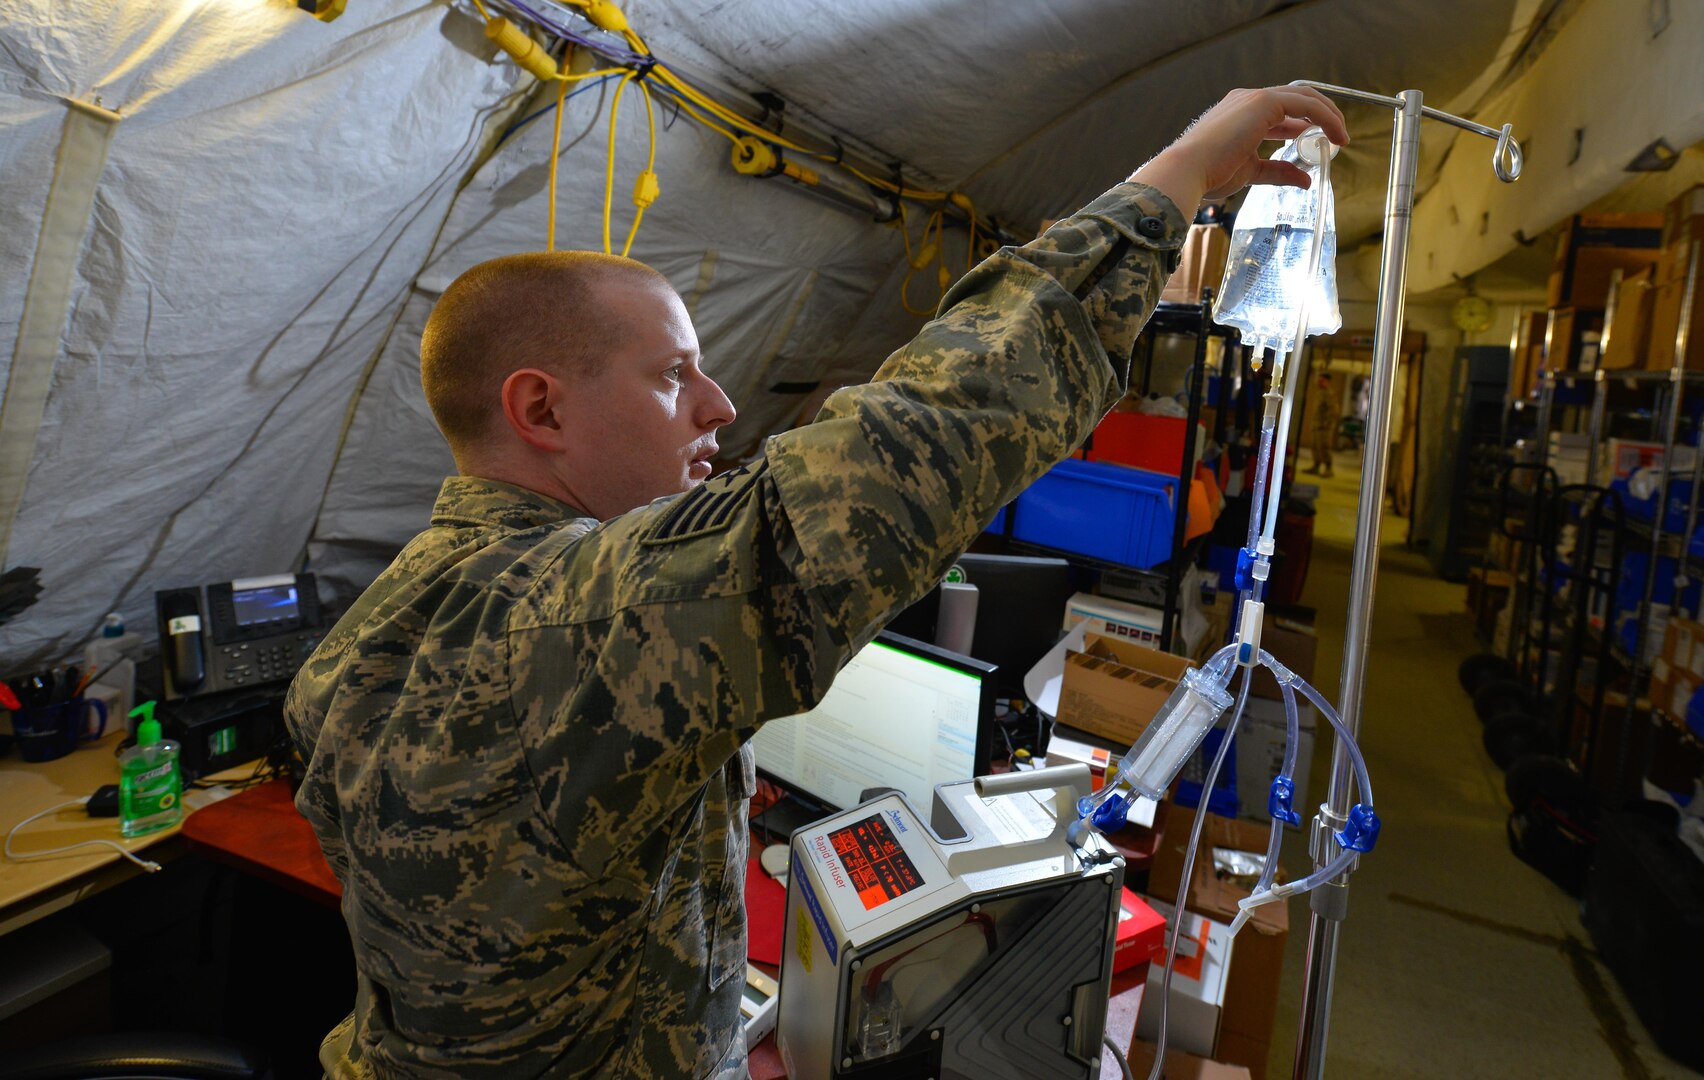 Staff Sgt. Ryan McGinniss, a biomedical equipment technician with the 332nd Expeditionary Medical Group, pours water into an infusion bag while testing a blood infusion pump unit May 9, 2017, in Southwest Asia. McGinnis is the only biomedical equipment technician for the last Expeditionary Medical Support System installation  supporting joint and coalition members deployed to Operation Inherent Resolve. (U.S. Air Force photo by Staff Sgt. Alexander W. Riedel)